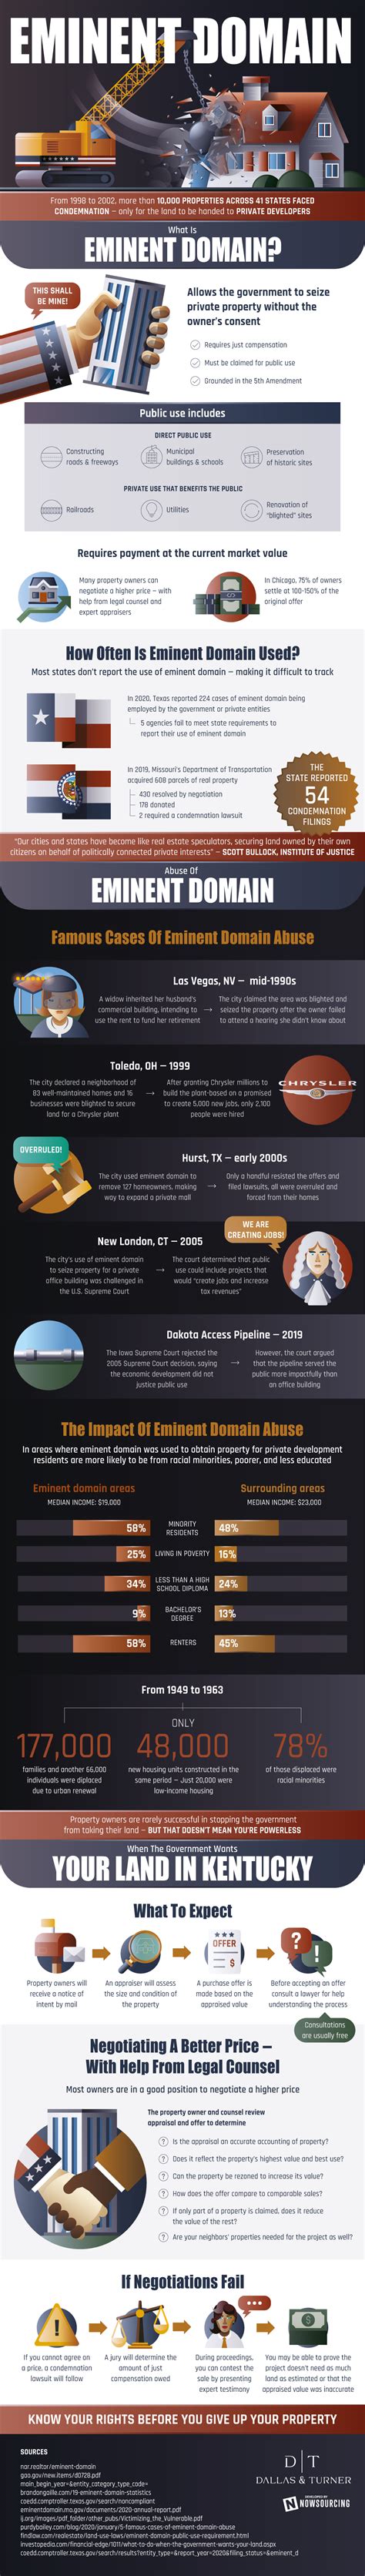 Eminent Domain Know Your Rights Infographic